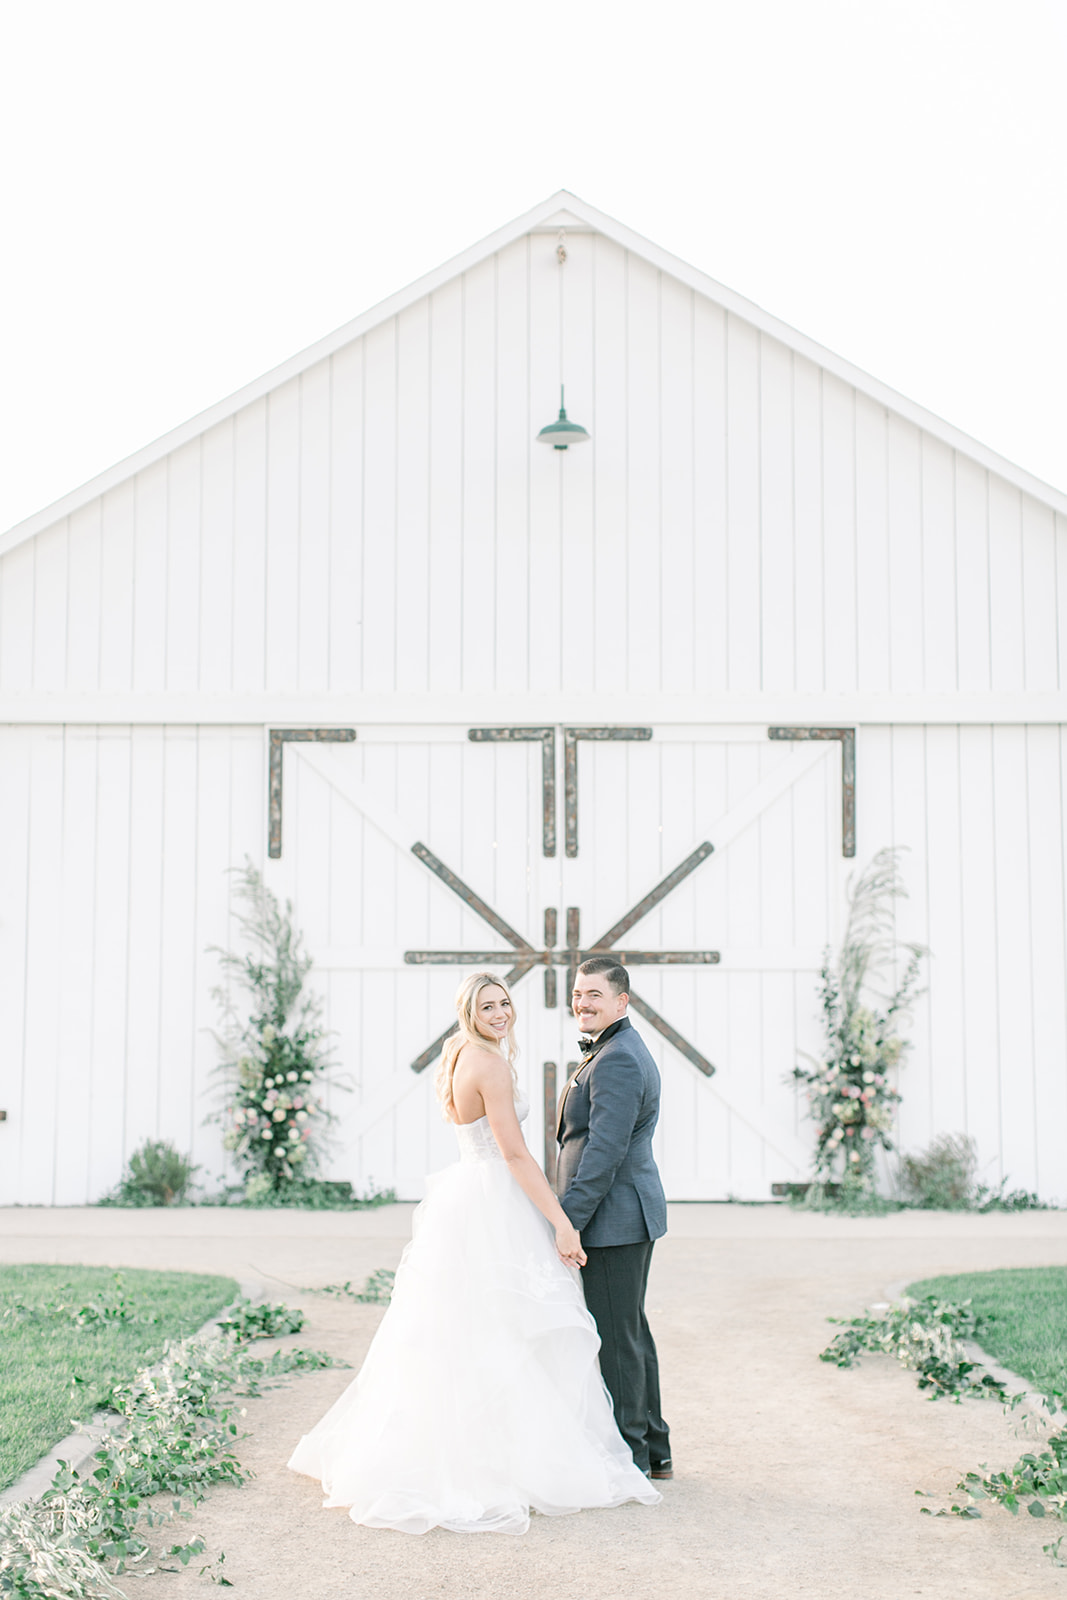 A Fresh and Modern Country Wedding at The White Barn in Edna Valley | The Wedding Standard